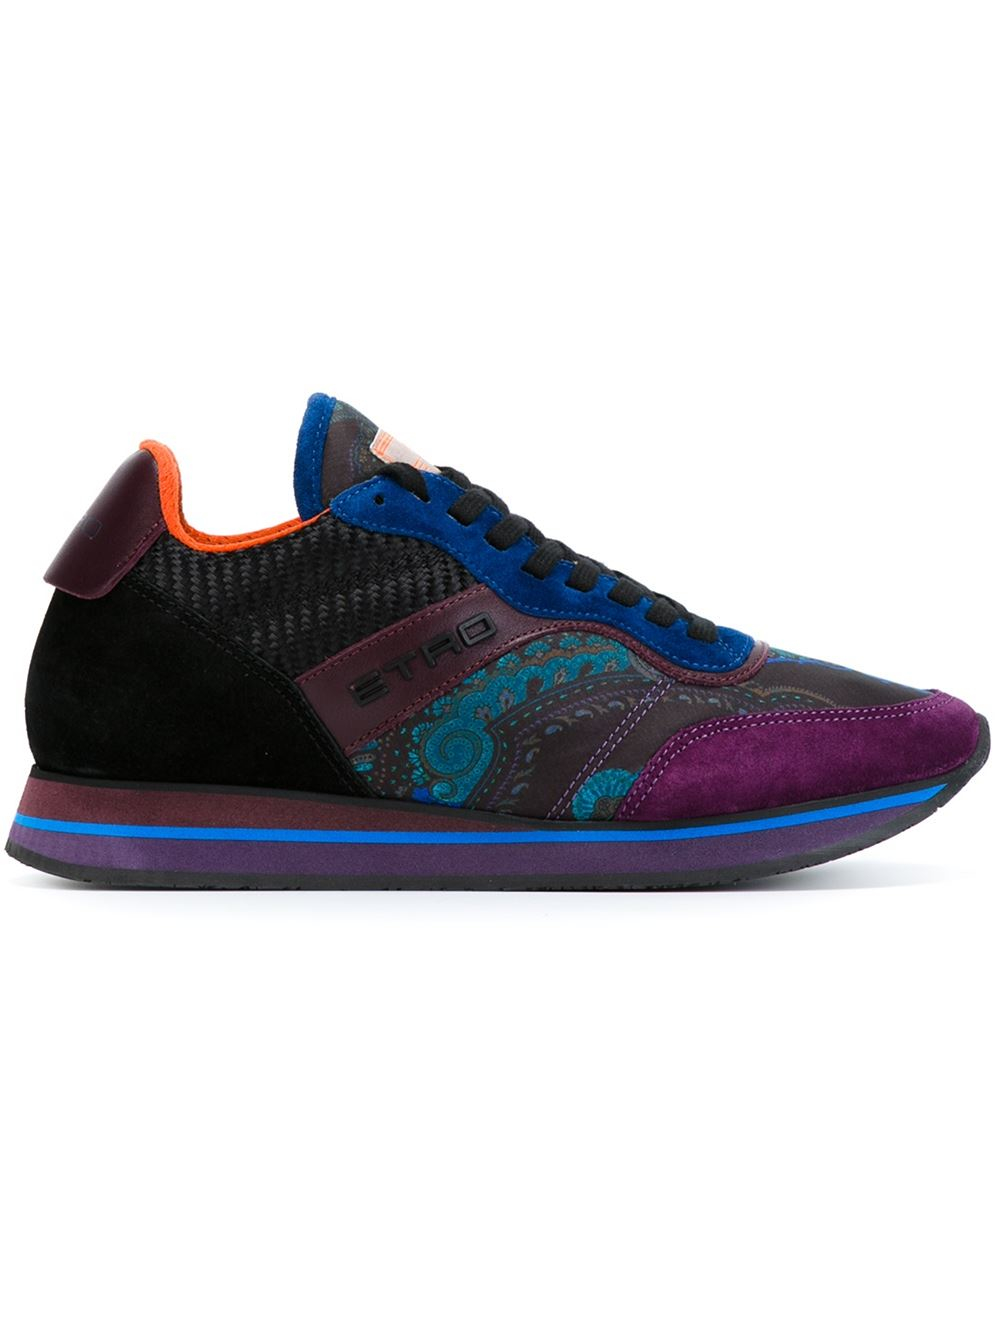 Etro Lace-up Sneakers in Black | Lyst